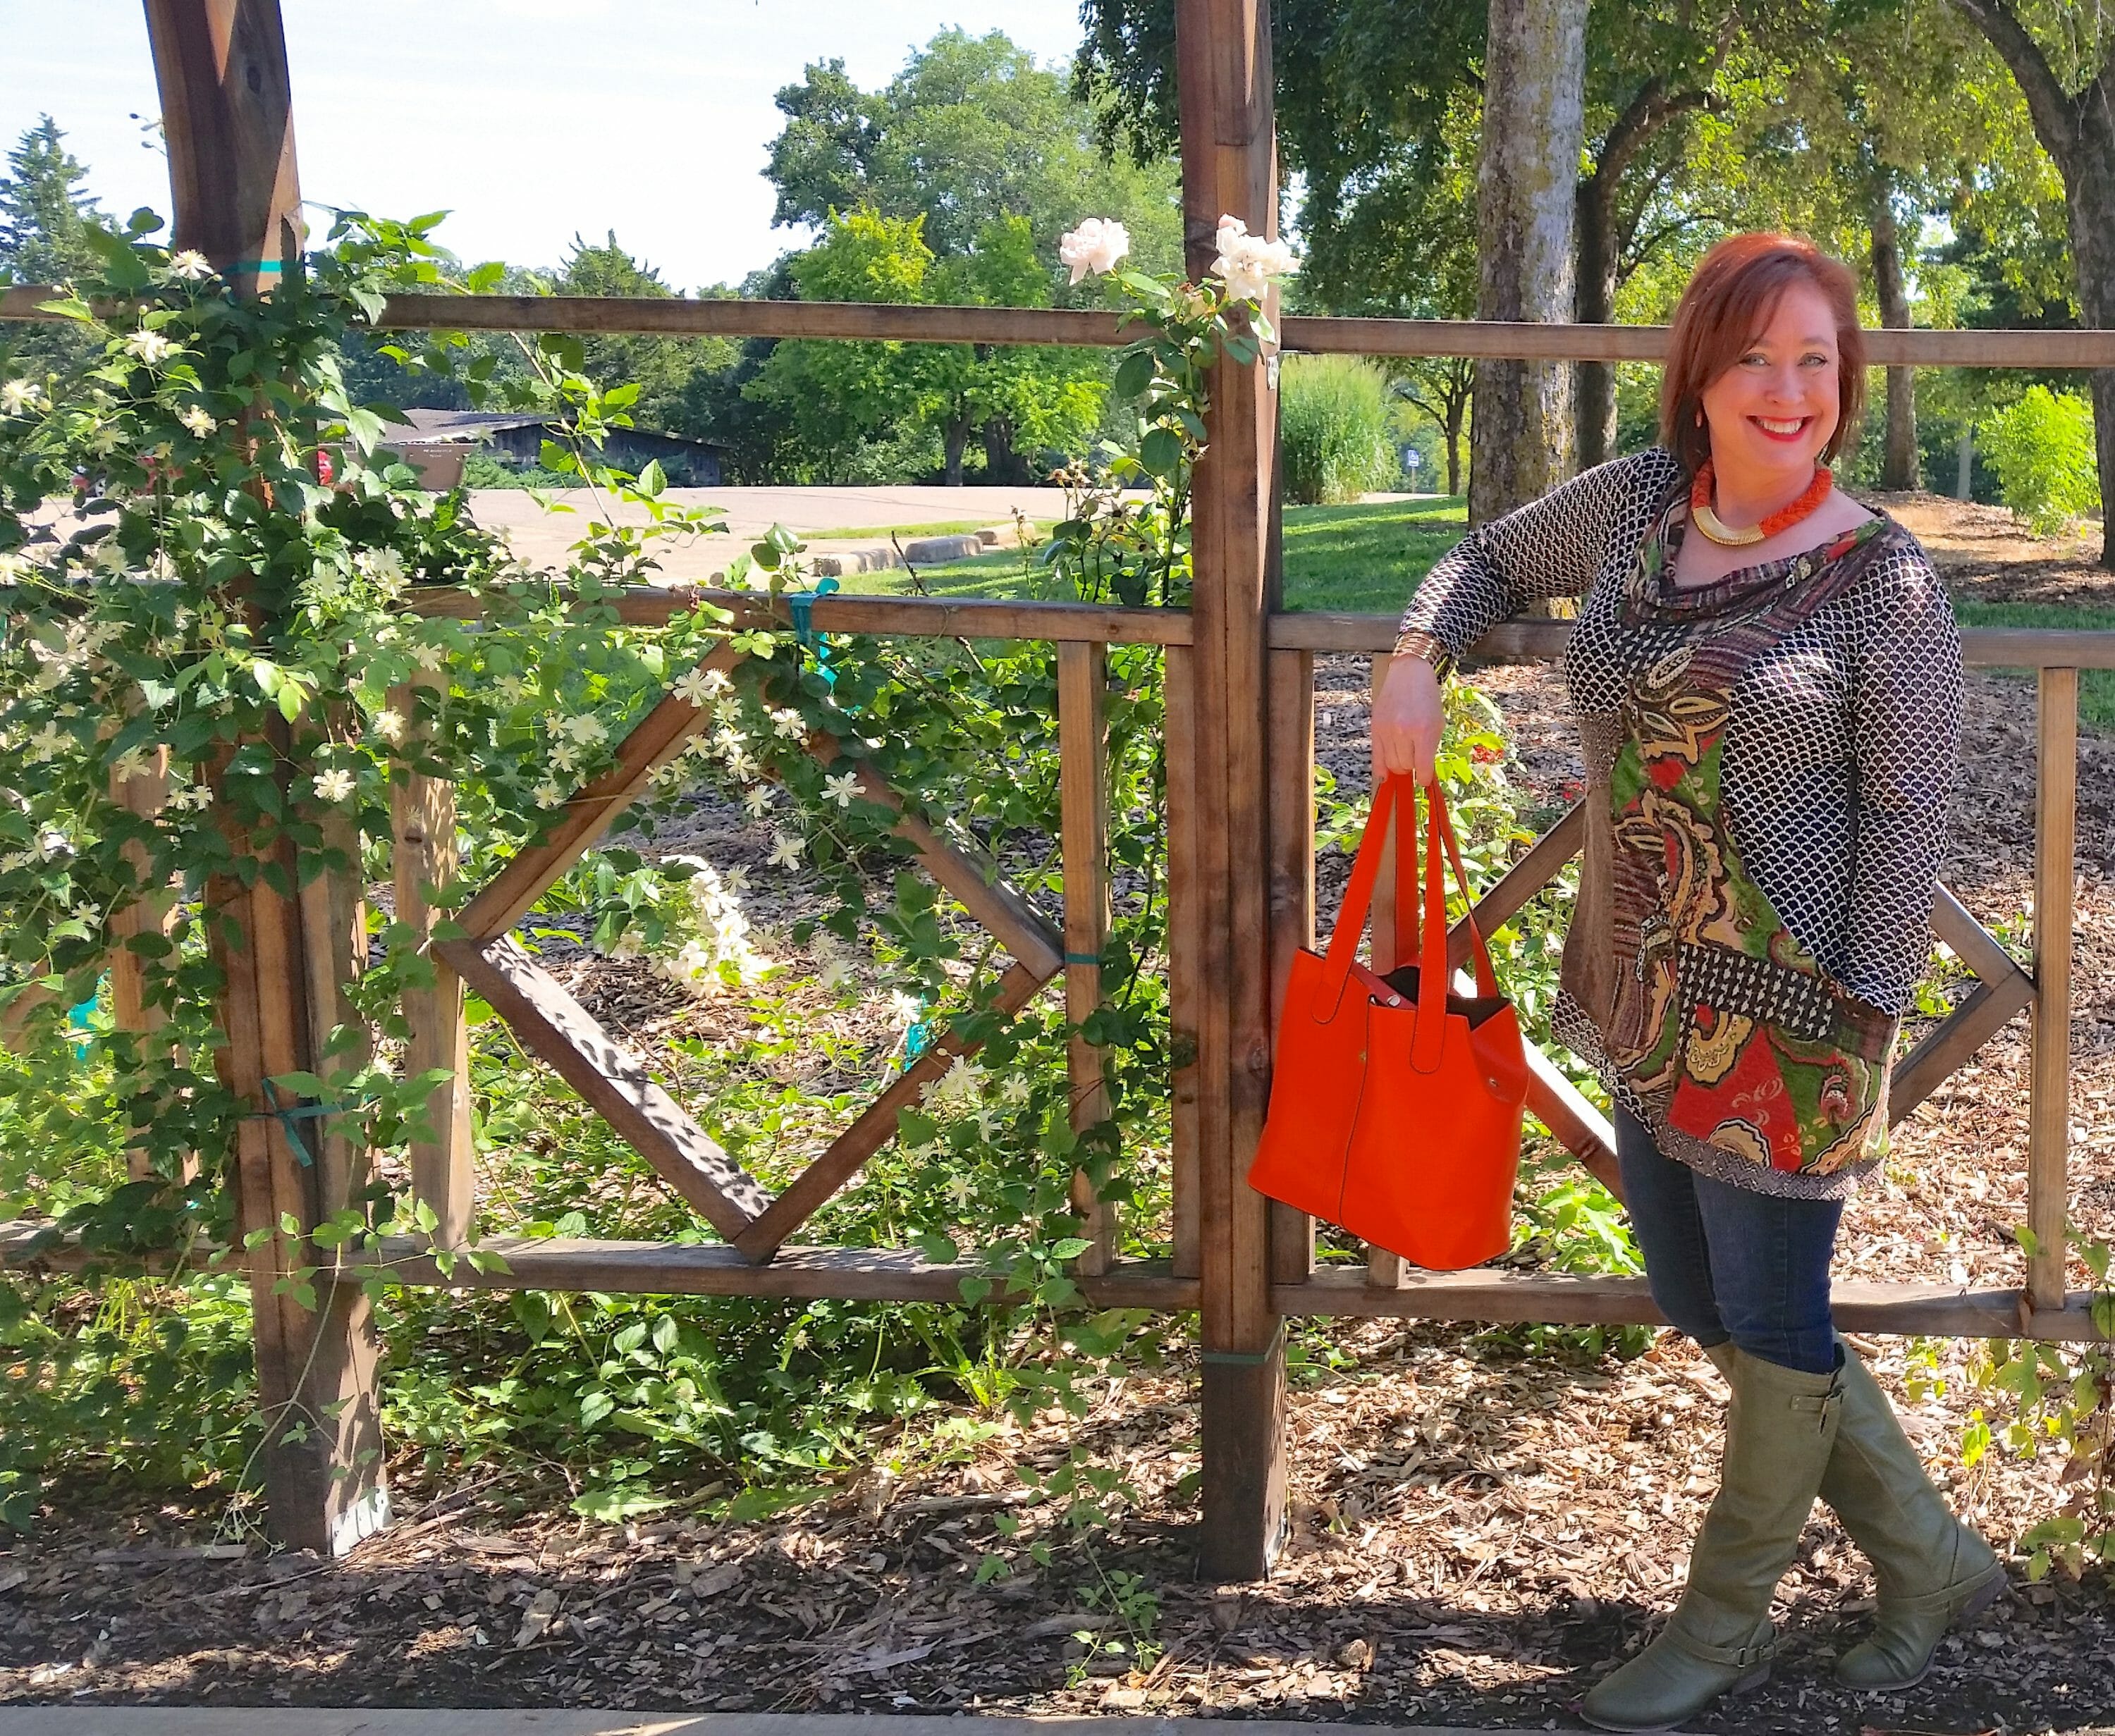 woman standing in front of gate in a top with orange accents and a orange handbag